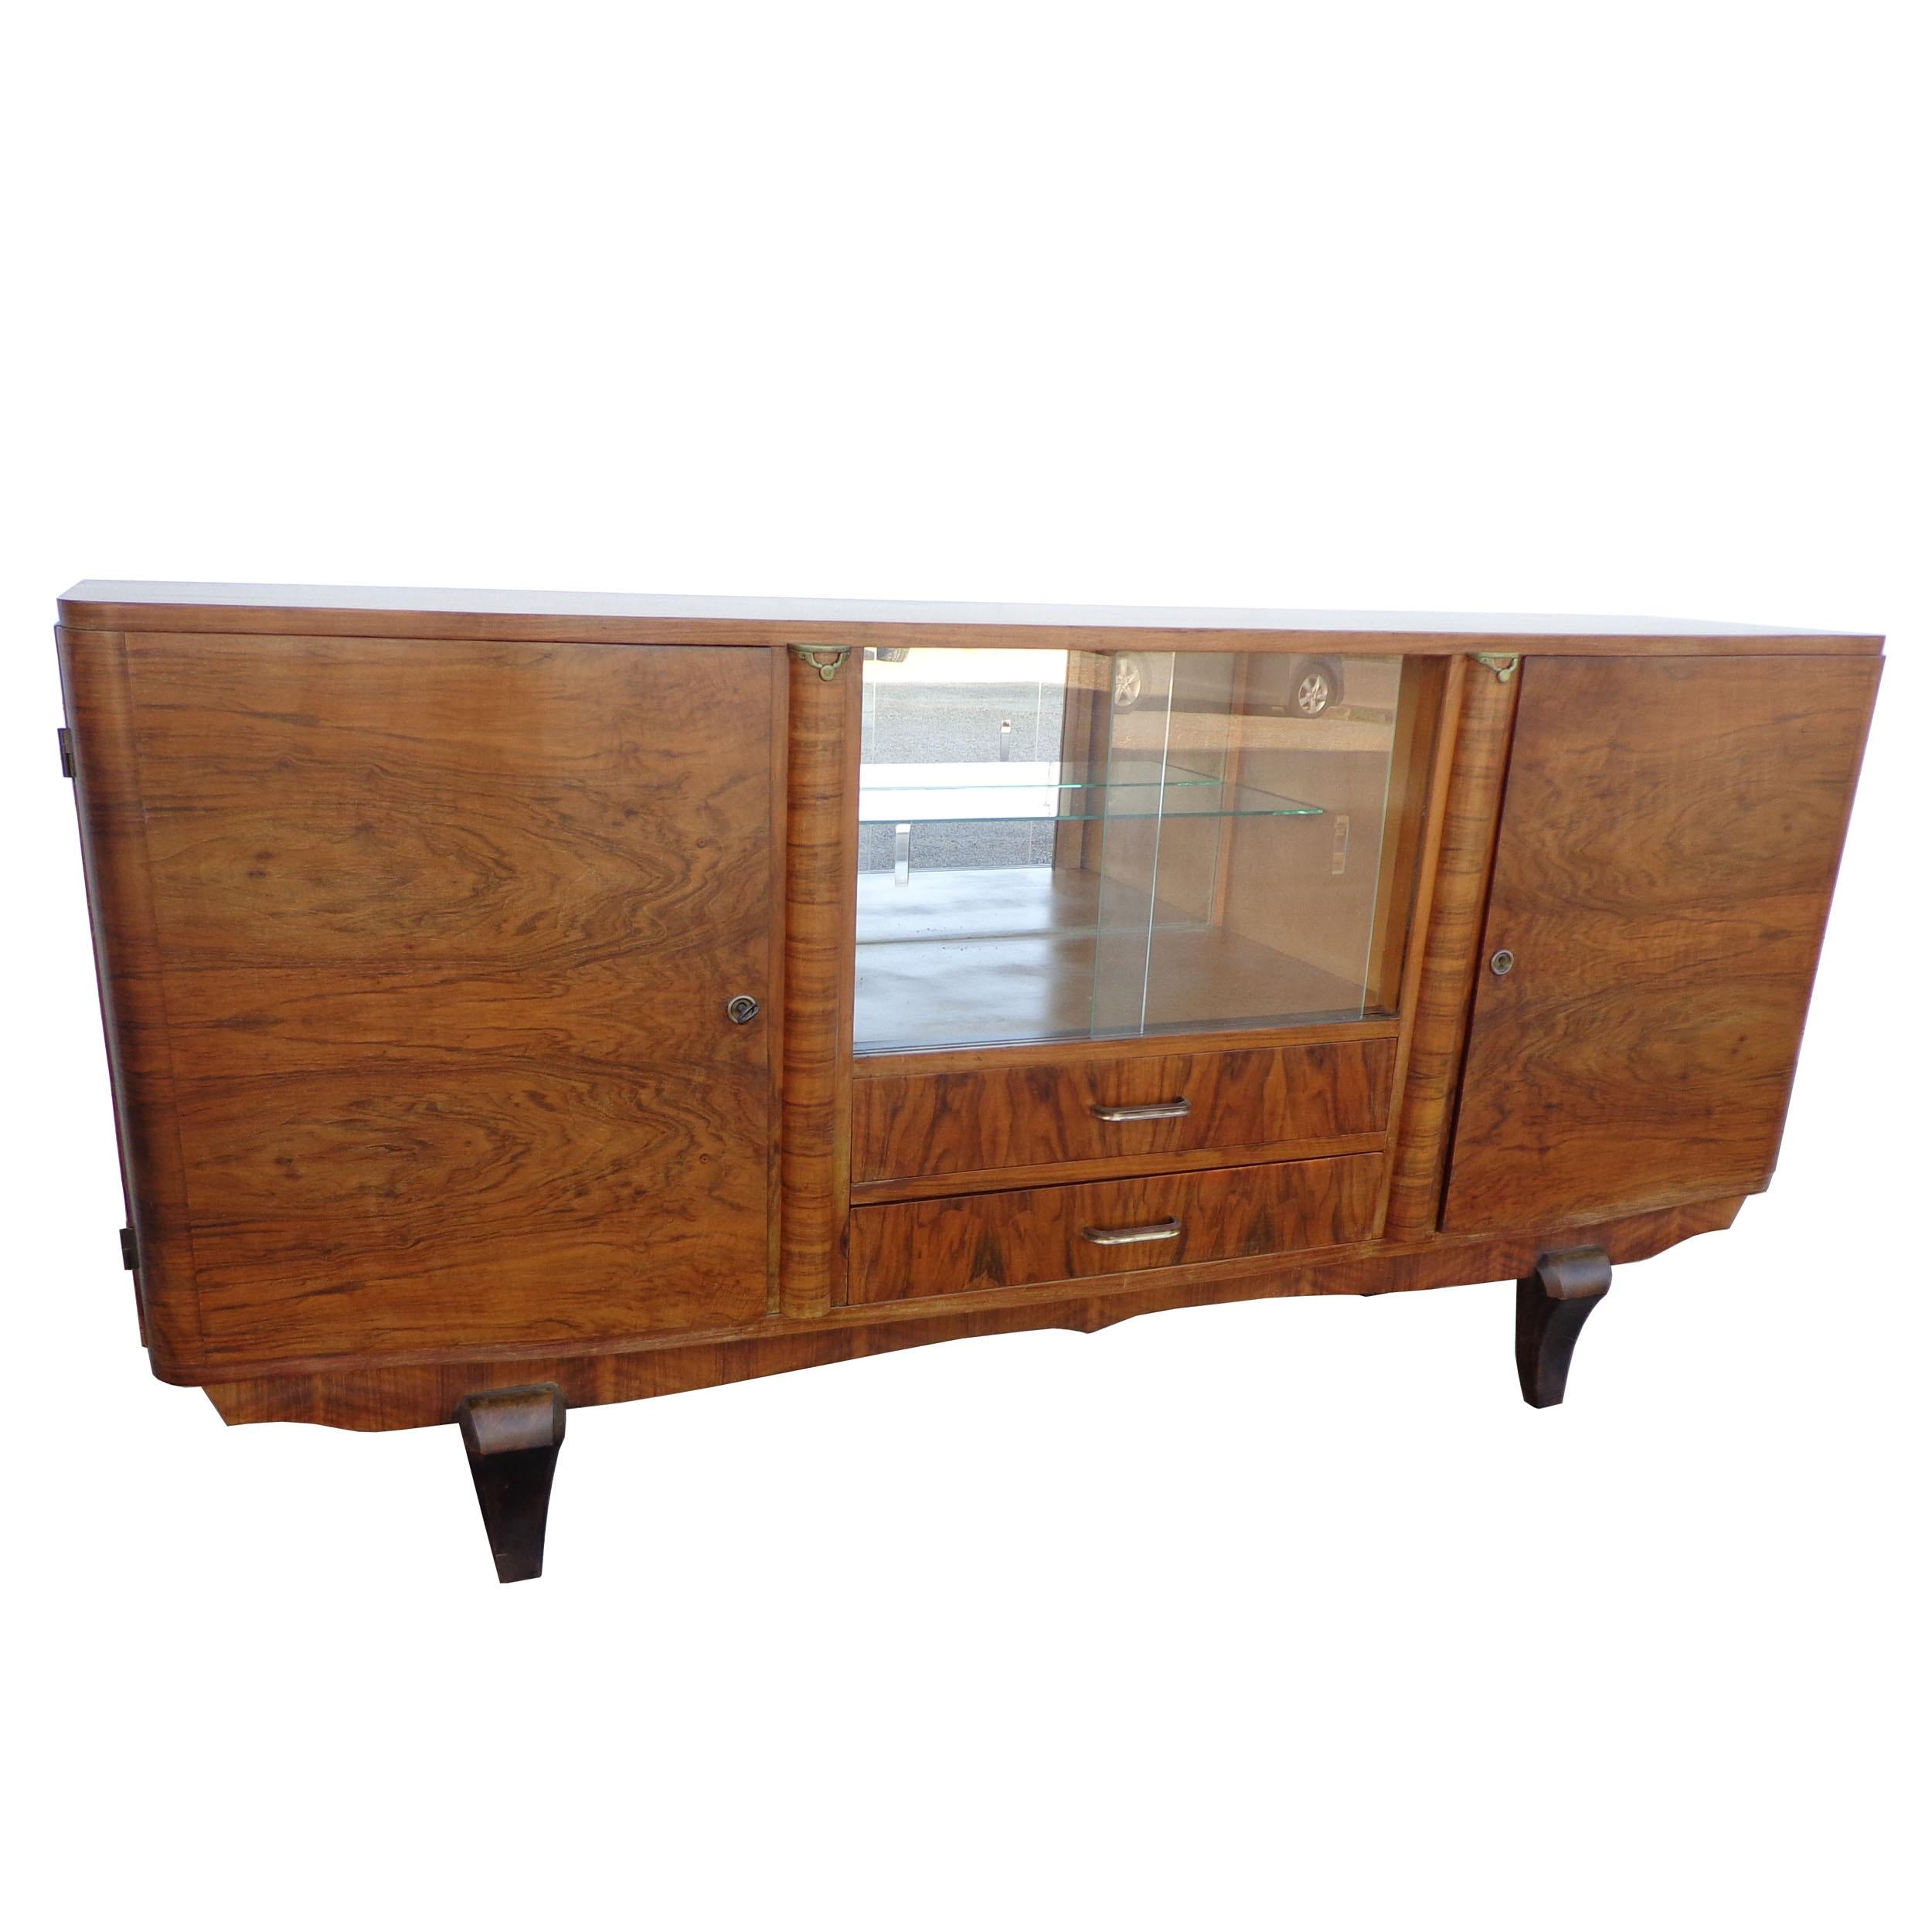 Vintage Art Deco cocktail cabinet
English cocktail bar cabinet of burled walnut from the Art Deco era.
Two storage cupboards, each with two shelves and a locking mechanism with key.
The center opens to a bar cupboard with a mirrored back and